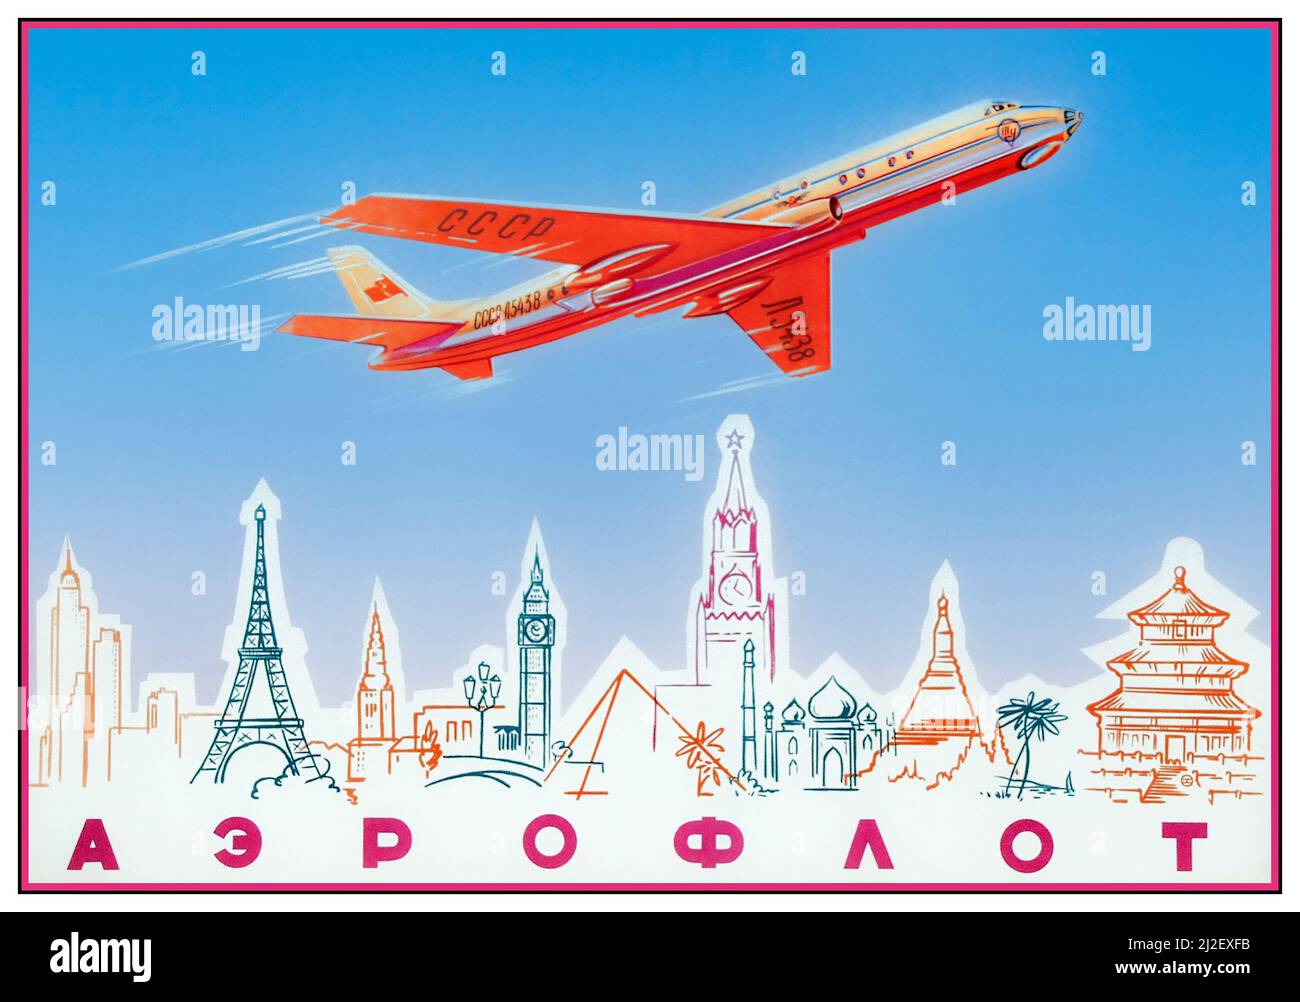 Vintage Aeroflot 1950's Soviet Russian aviation advertising poster for Soviet State Airline, Aeroflot. Poster features a jetliner aircraft with Soviet CCCP Tupolev Tu-104 flying over the skylines of  America, Europe and Asia capitals of the world with notable buildings, including the Eiffel Tower  Paris, 'Big Ben'  London,  pyramid for Cairo and  Kremlin for Moscow.  USSR Russia, 1950s, Stock Photo